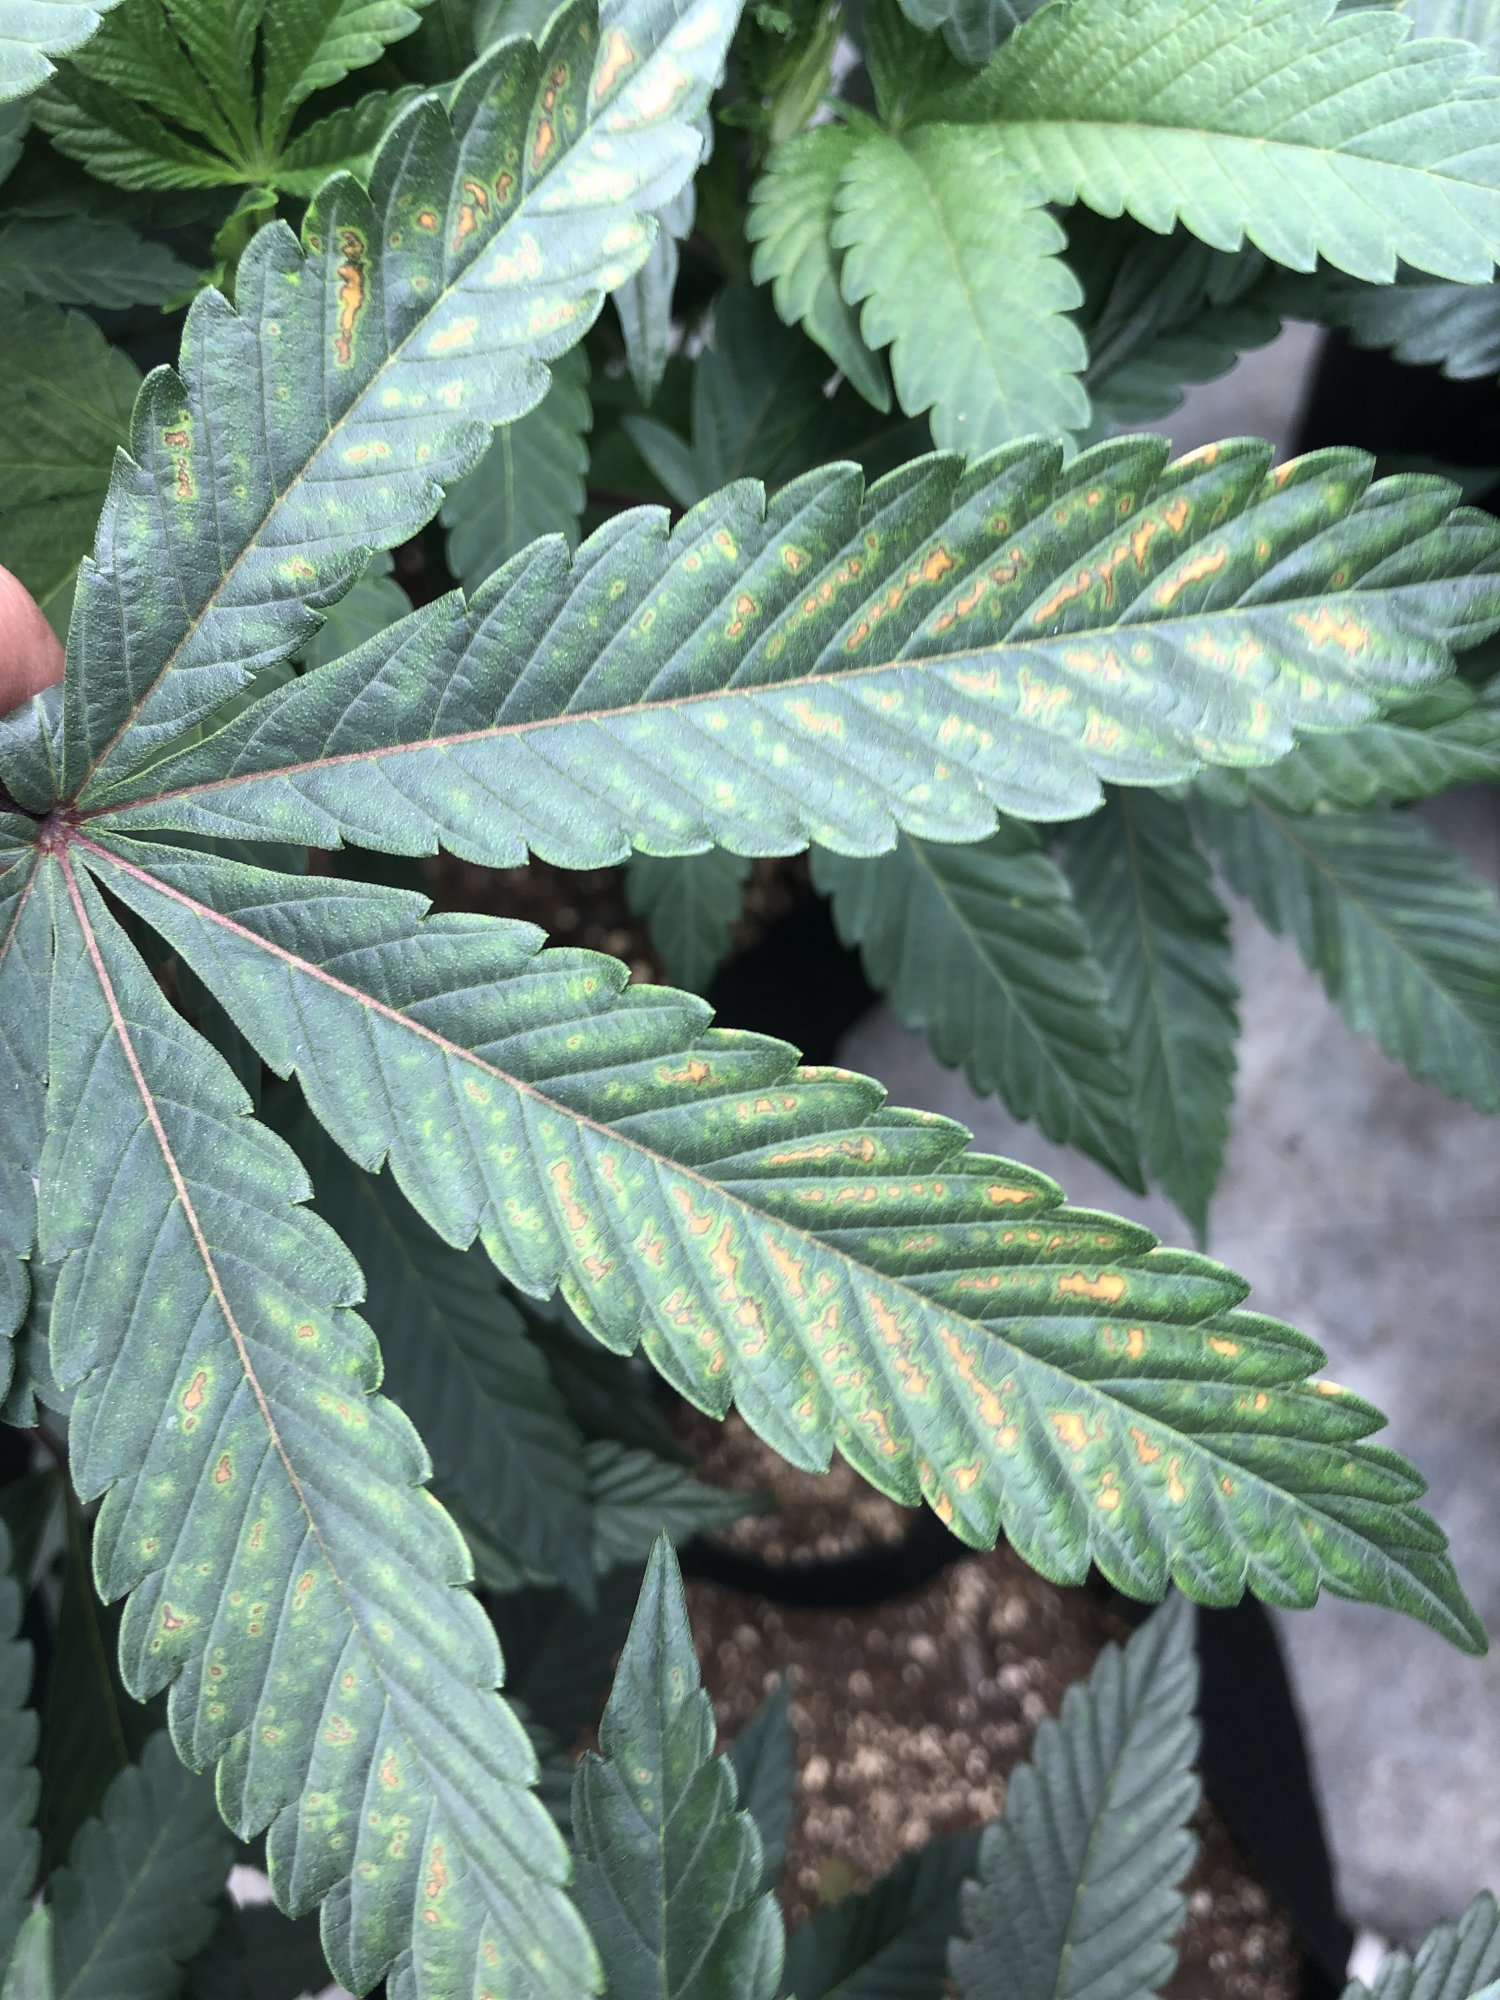 What could this deficiency help 2